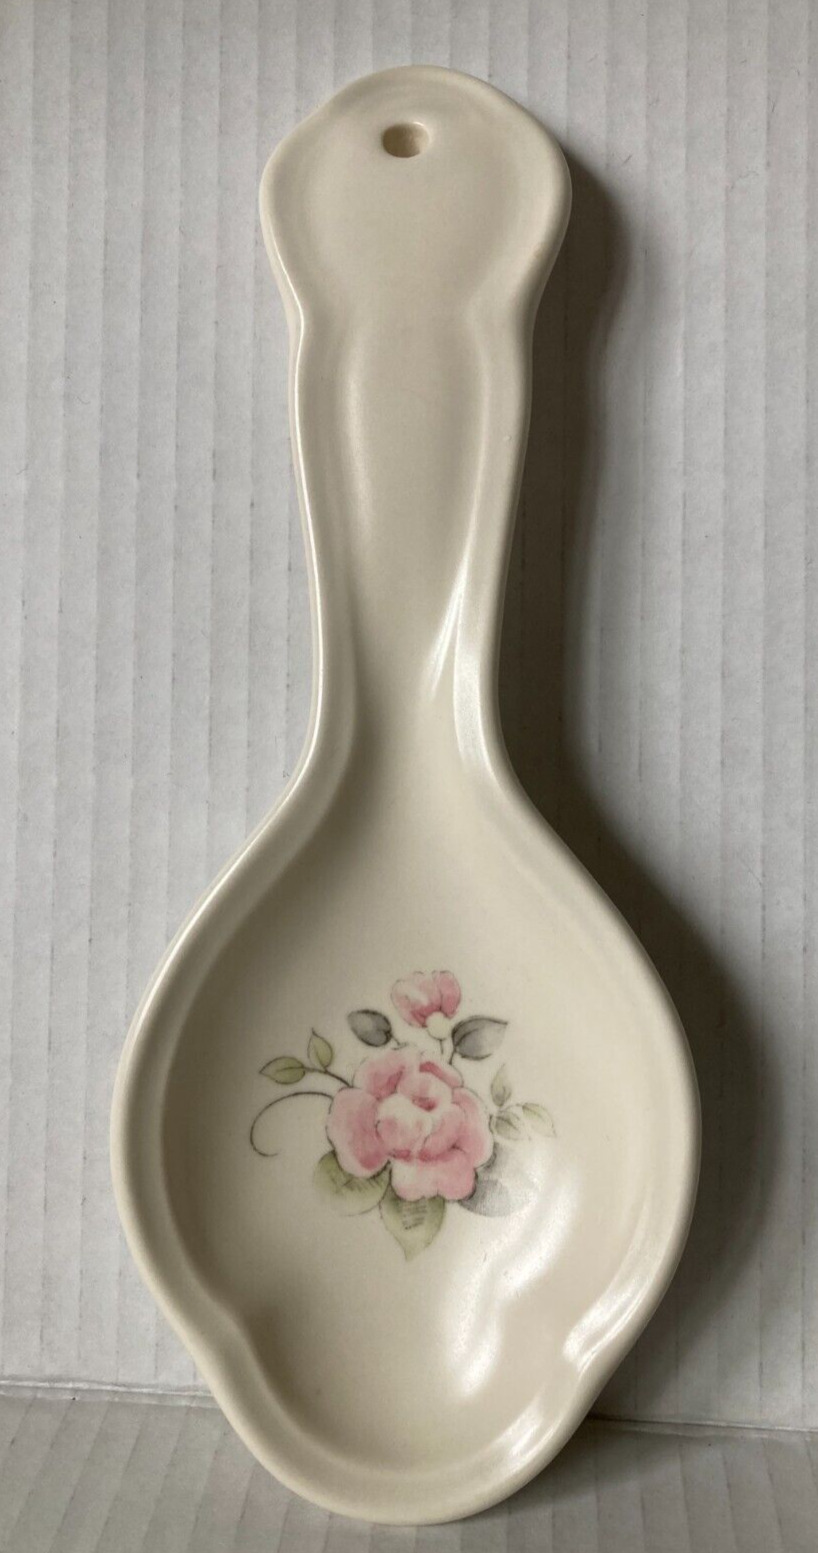 Vintage Pfaltzgraff Pottery Tea Rose Spoon Rest Stoneware Shabby Cottage Country